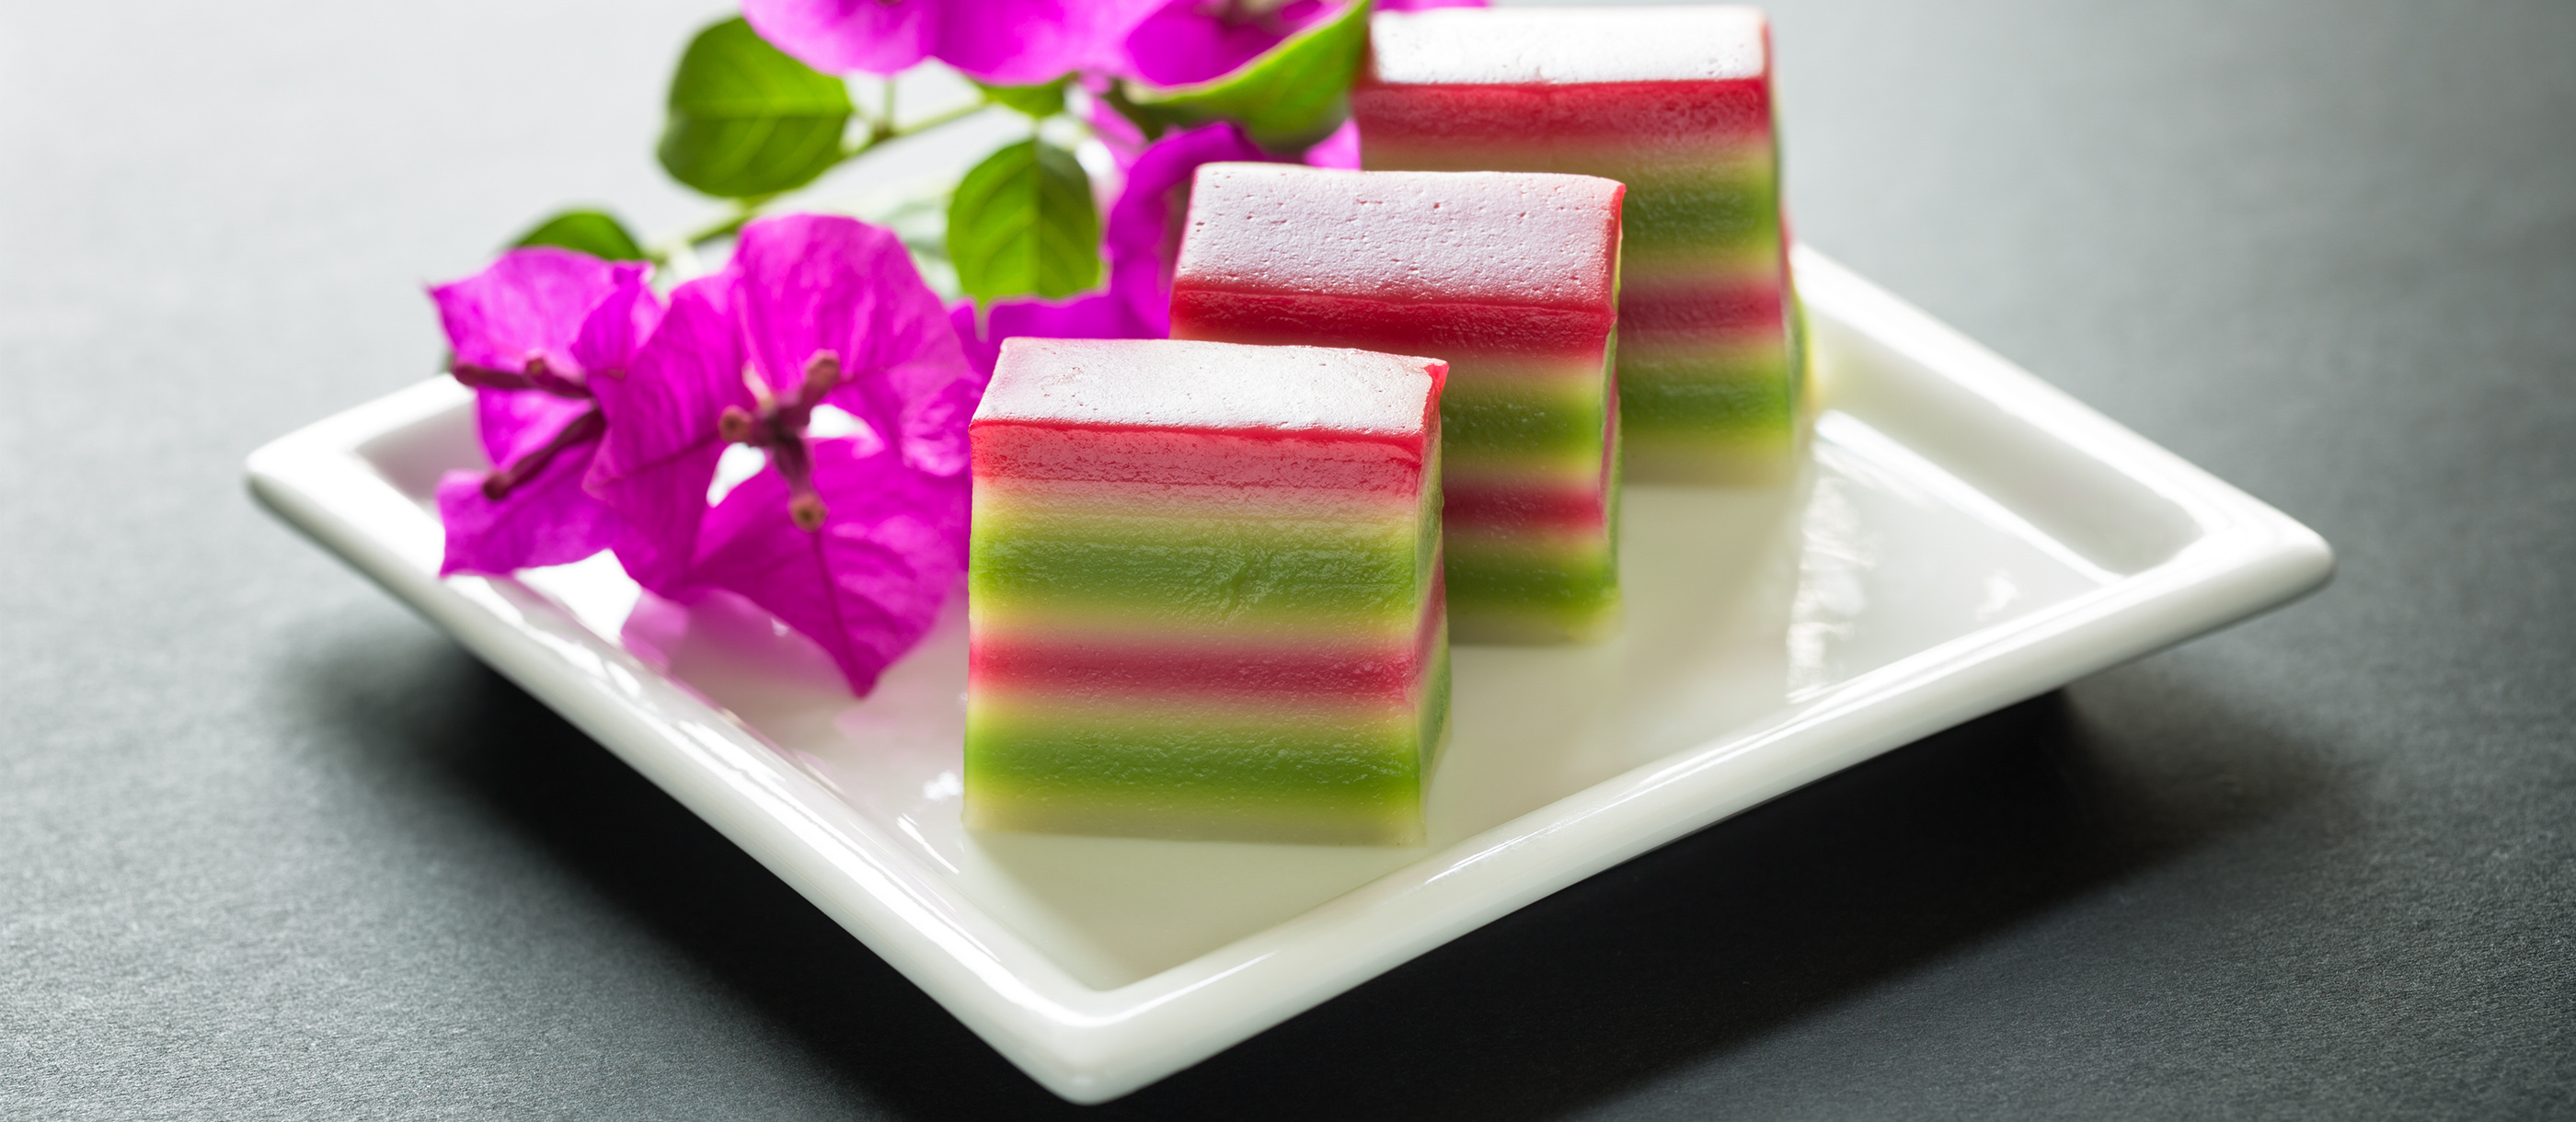 Kuih Lapis | Traditional Cake From Indonesia, Southeast Asia